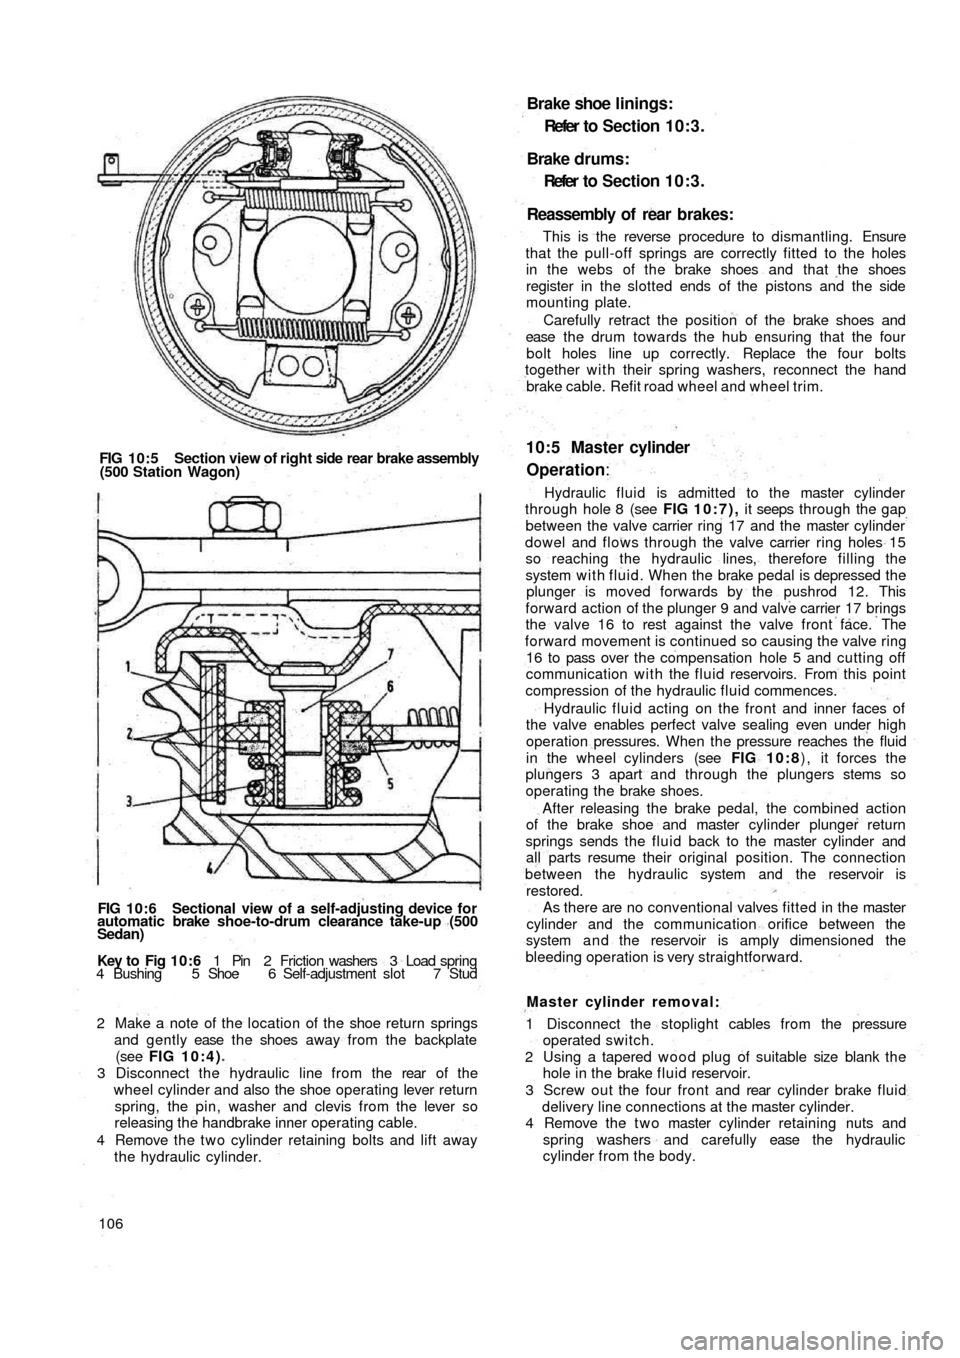 FIAT 500 1964 1.G Workshop Manual FIG 10:5 Section view of right side rear brake assembly
(500 Station Wagon)
FIG 10:6 Sectional view of a self-adjusting device for
automatic brake shoe-to-drum clearance take-up (500
Sedan)
Key  to   